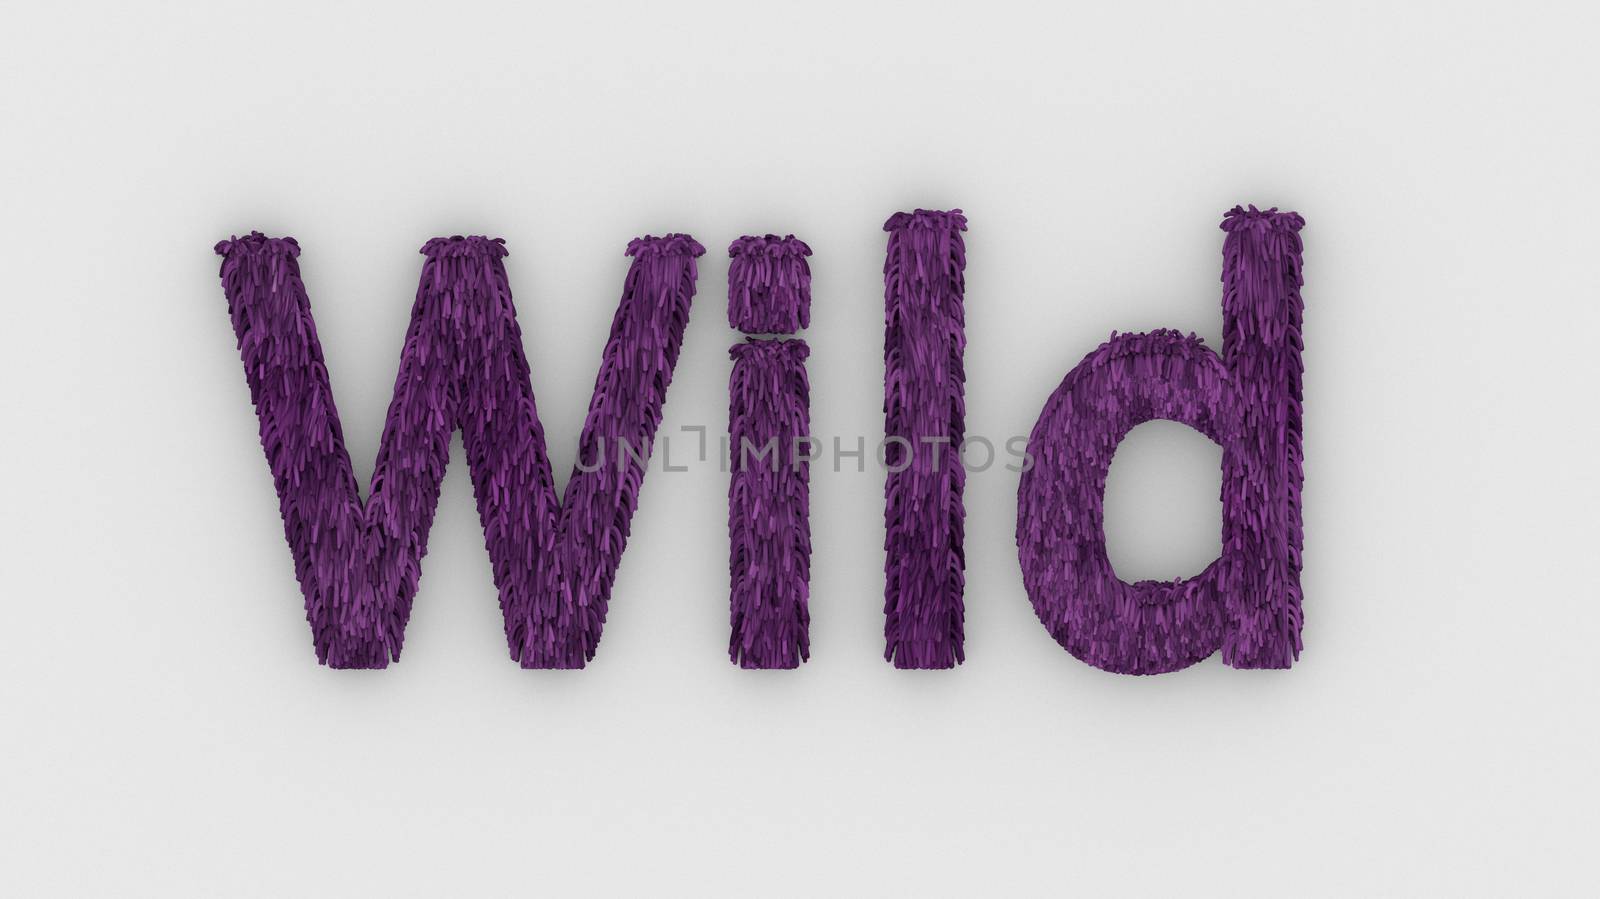 Wild - 3d word purple on white background. render furry letters. hair. wilds fur. emblem logo design template. wild animals, feeling and relationships. beasts of nature by Andreajk3